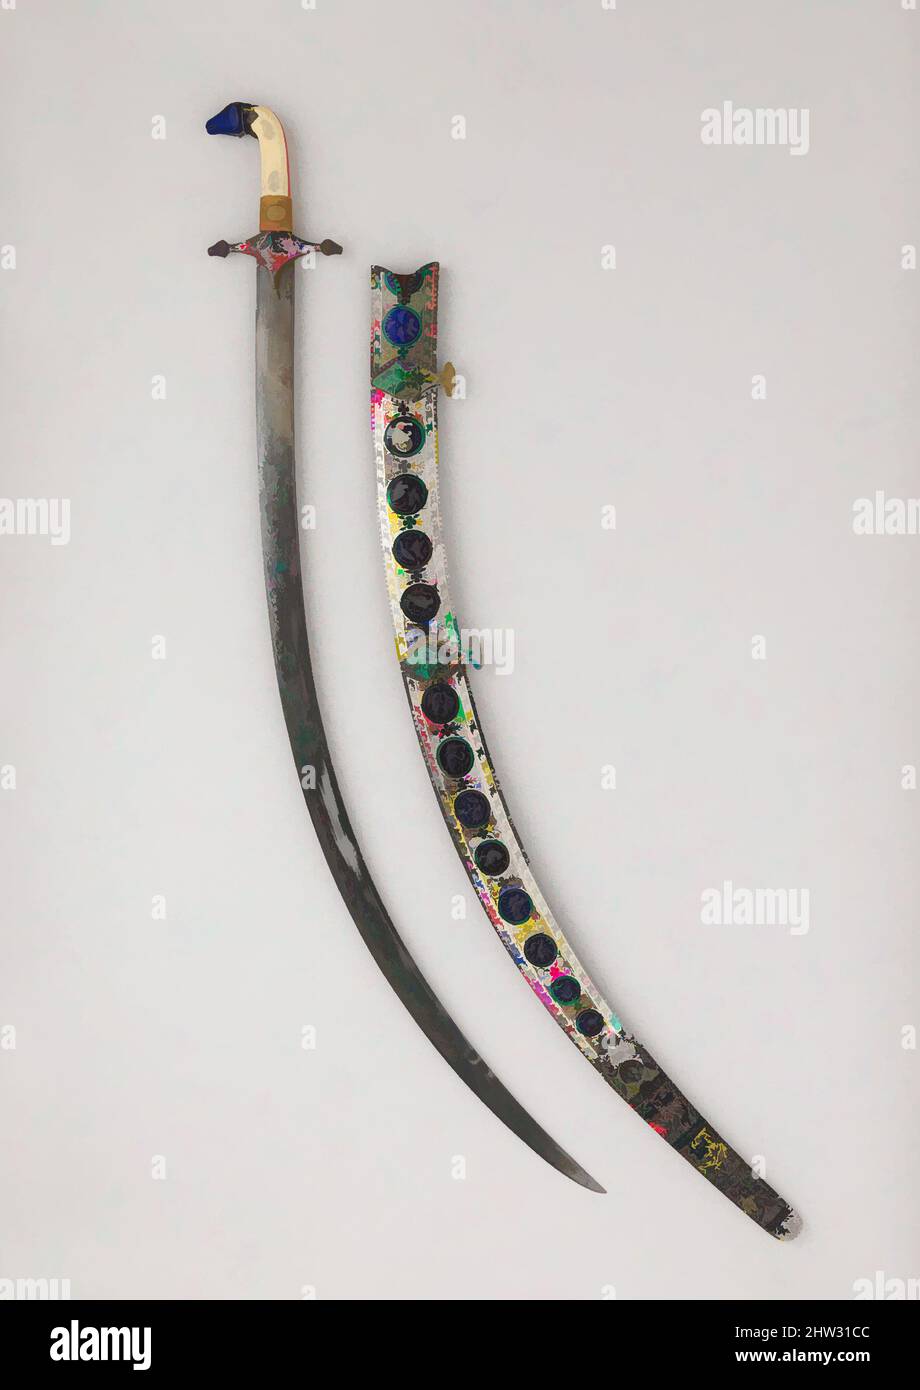 Art inspired by Saber (Shamshir) with Scabbard, hilt and scabbard, dated 1819; blade, 18th century, probably Lucknow, Uttar Pradesh, probably Indian; hilt and scabbard, Indian, probably Lucknow, Steel, silver, enamel, ivory, gold, glass, L. with scabbard 38 3/4 in. (98.4 cm); L, Classic works modernized by Artotop with a splash of modernity. Shapes, color and value, eye-catching visual impact on art. Emotions through freedom of artworks in a contemporary way. A timeless message pursuing a wildly creative new direction. Artists turning to the digital medium and creating the Artotop NFT Stock Photo